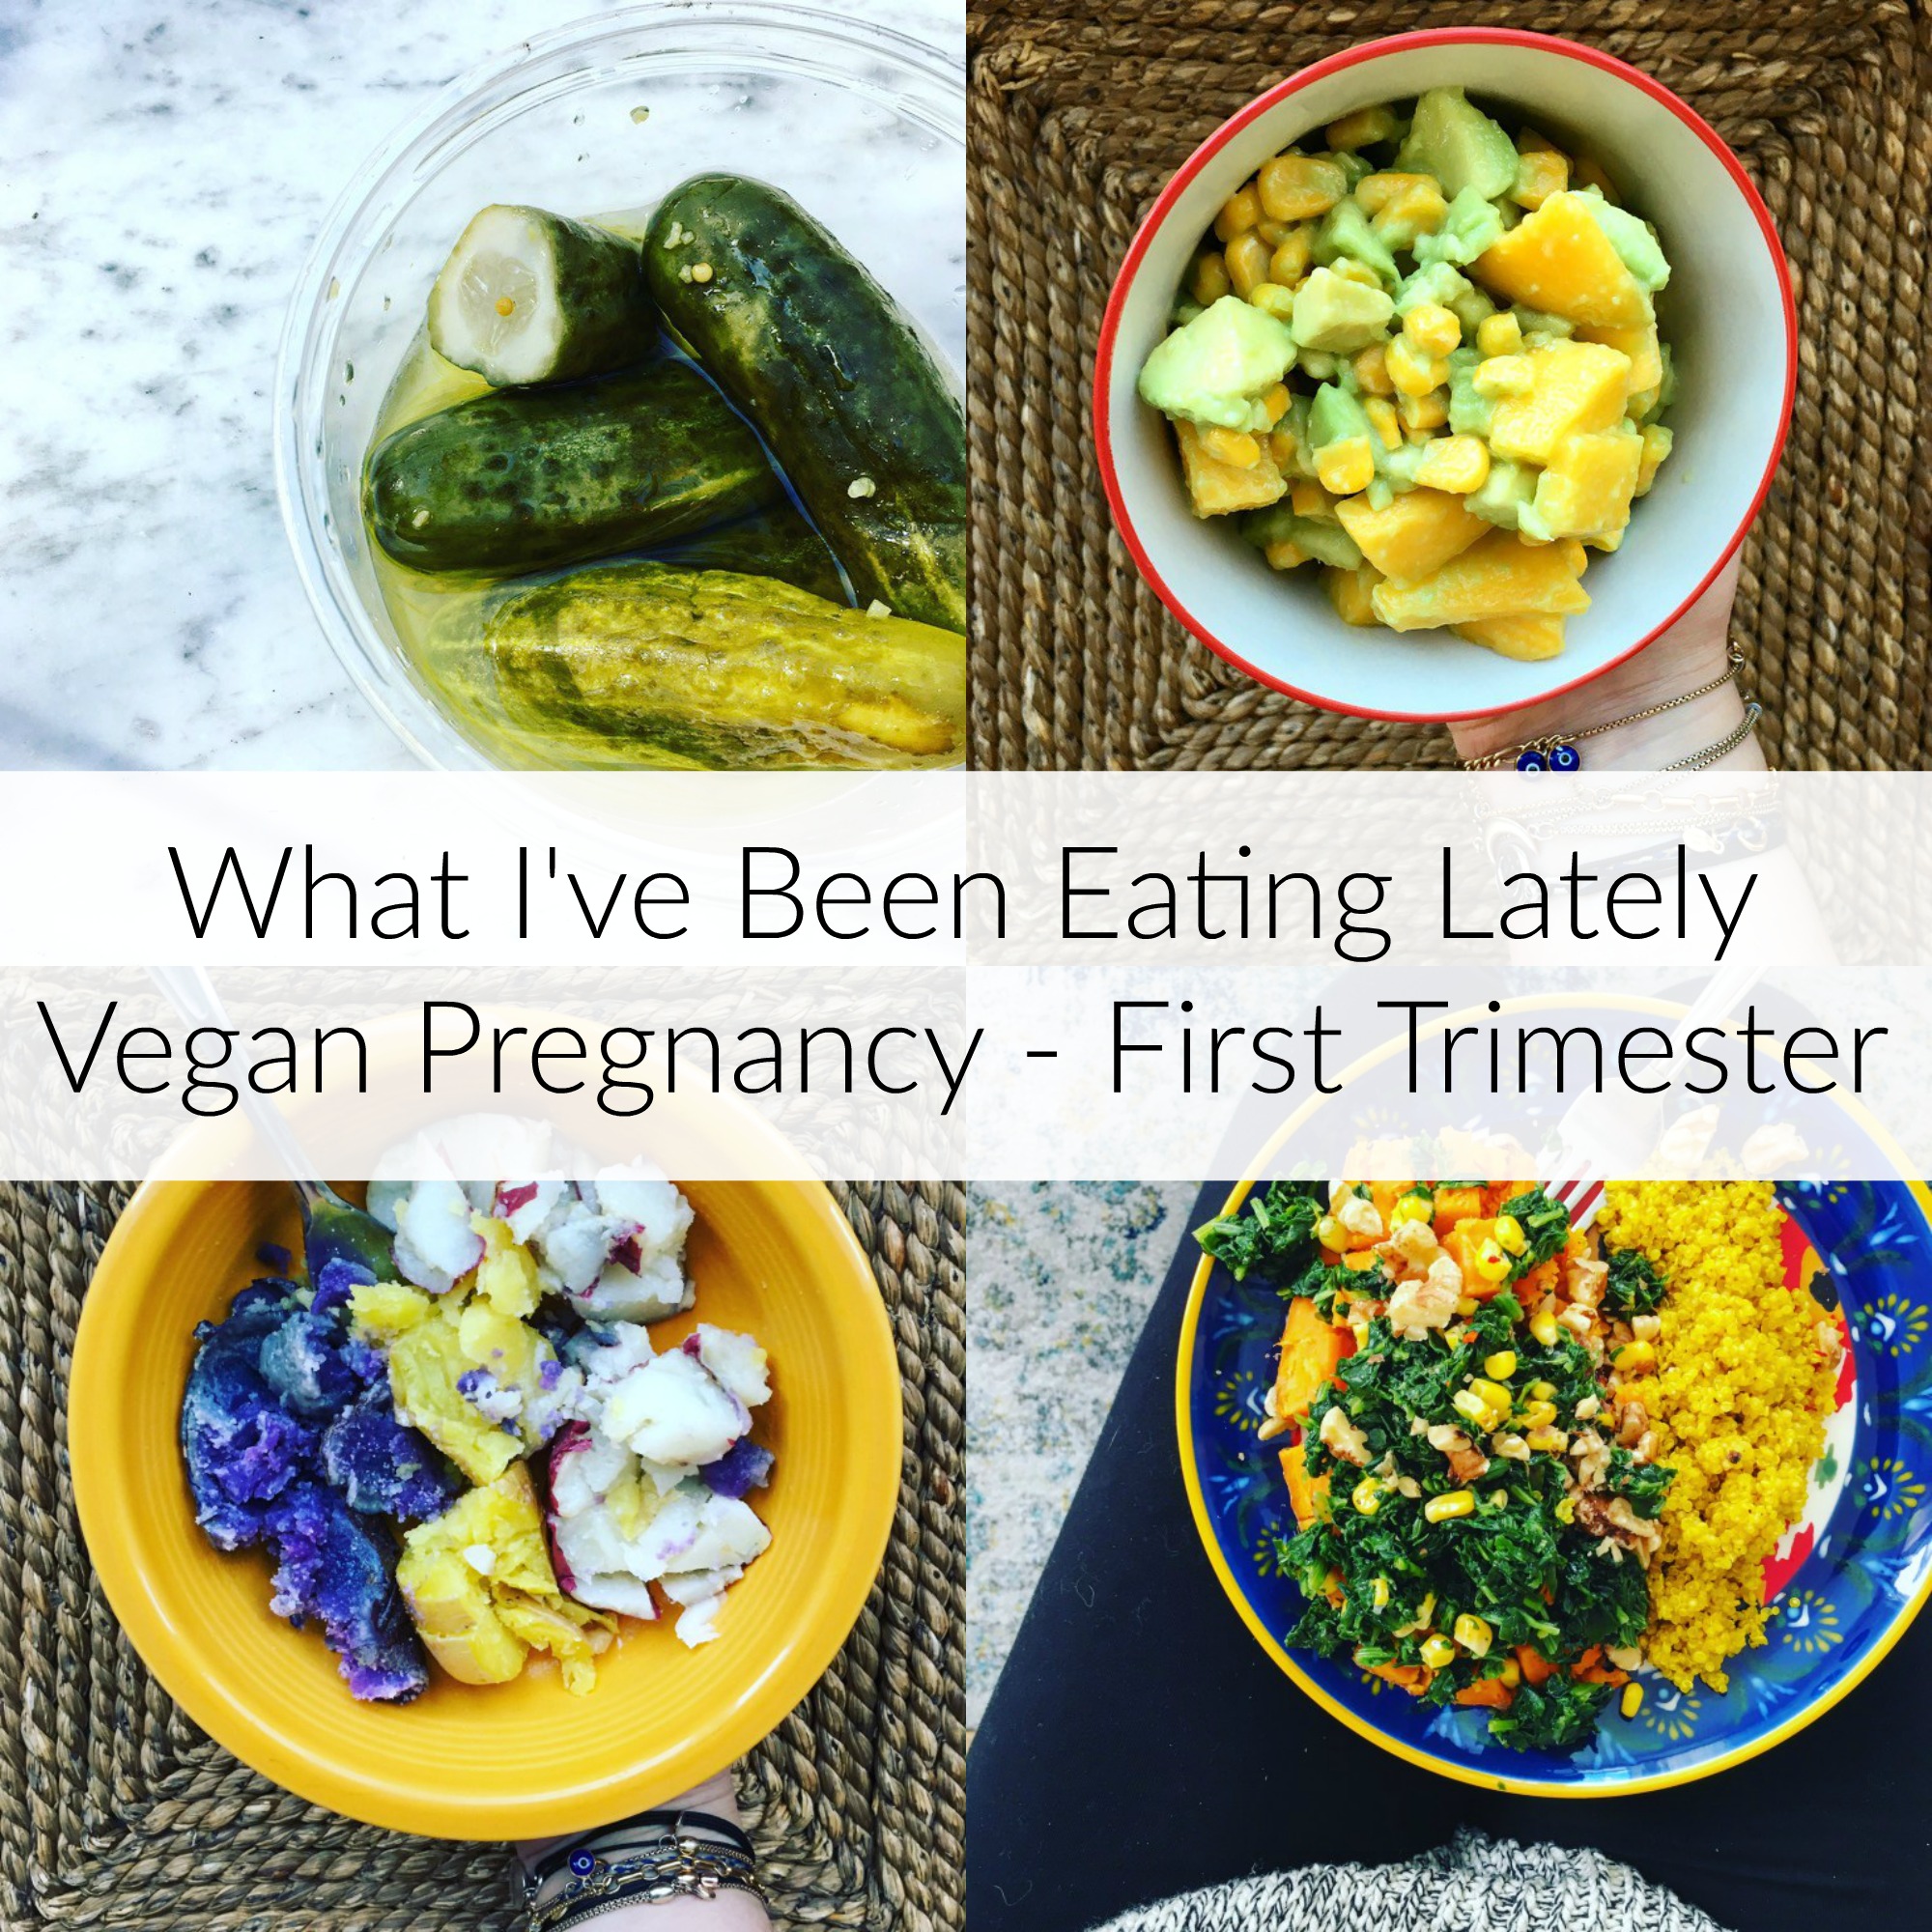 What I've Been Eating Lately [Vegan Pregnancy - First Trimester]